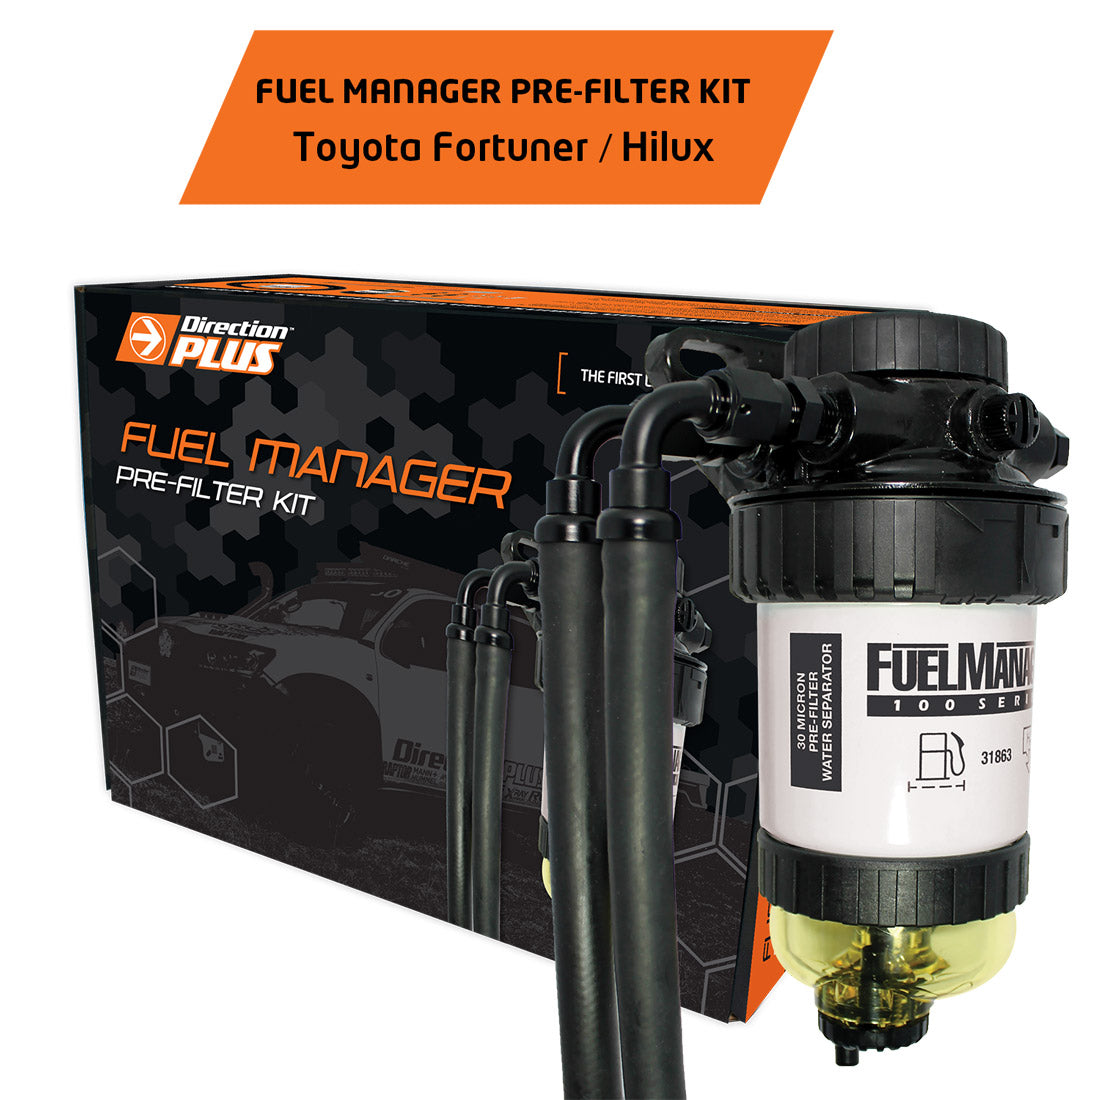 Toyota Hilux N80 & Fortuner 2.8L Fuel Manager Fuel Pre Filter Kit (dual battery compatible)